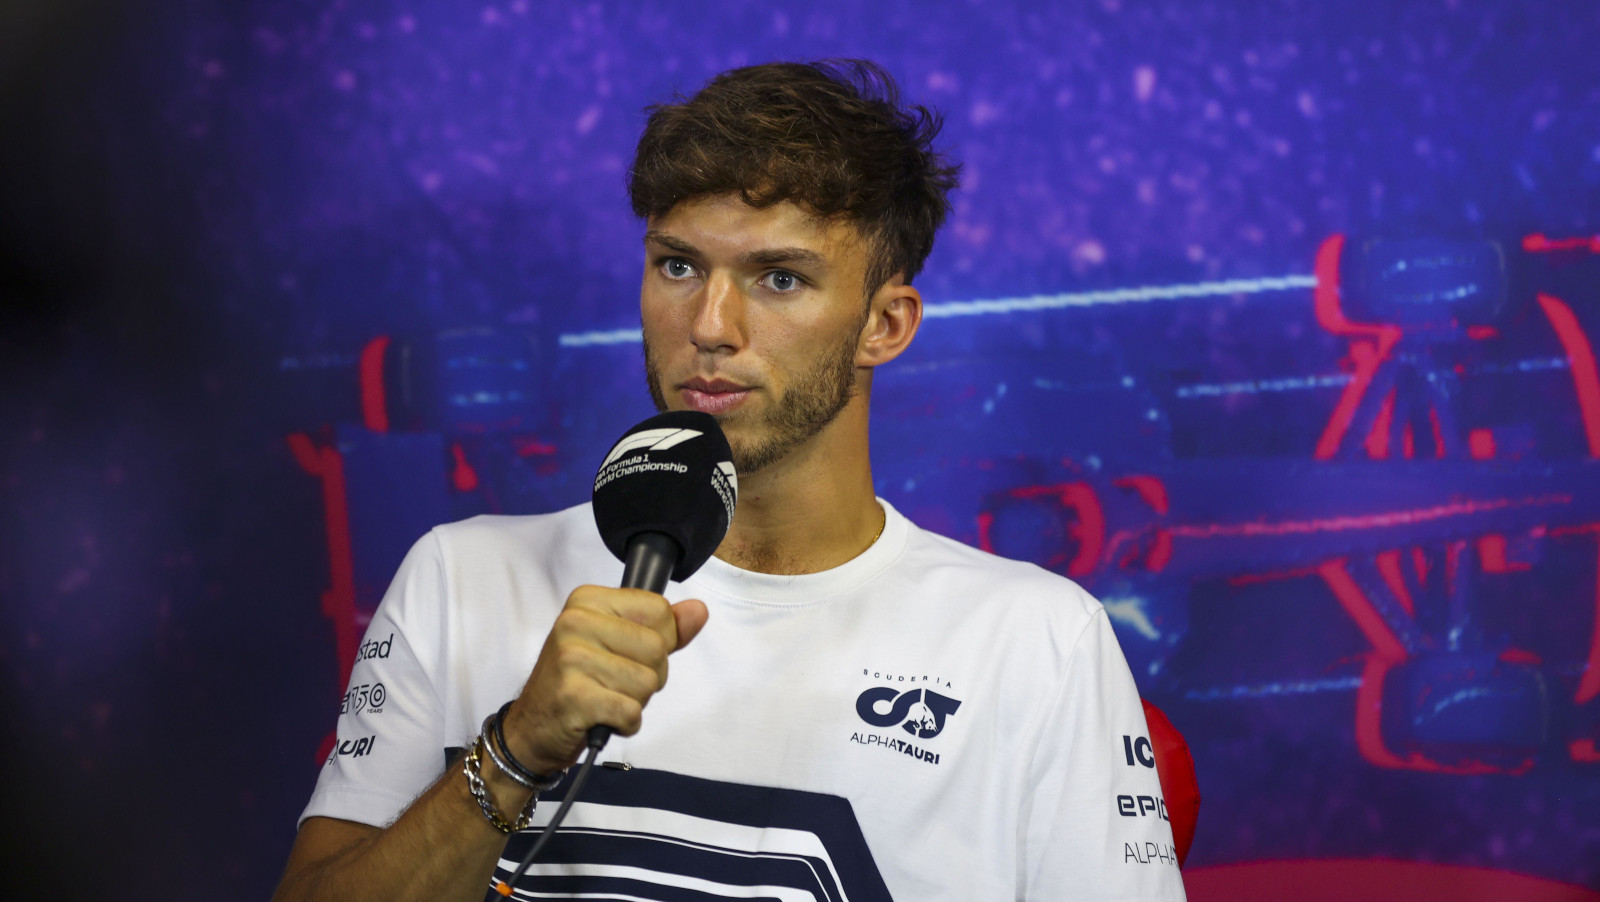 Pierre Gasly holding the microphone during a press conference. France July 2022